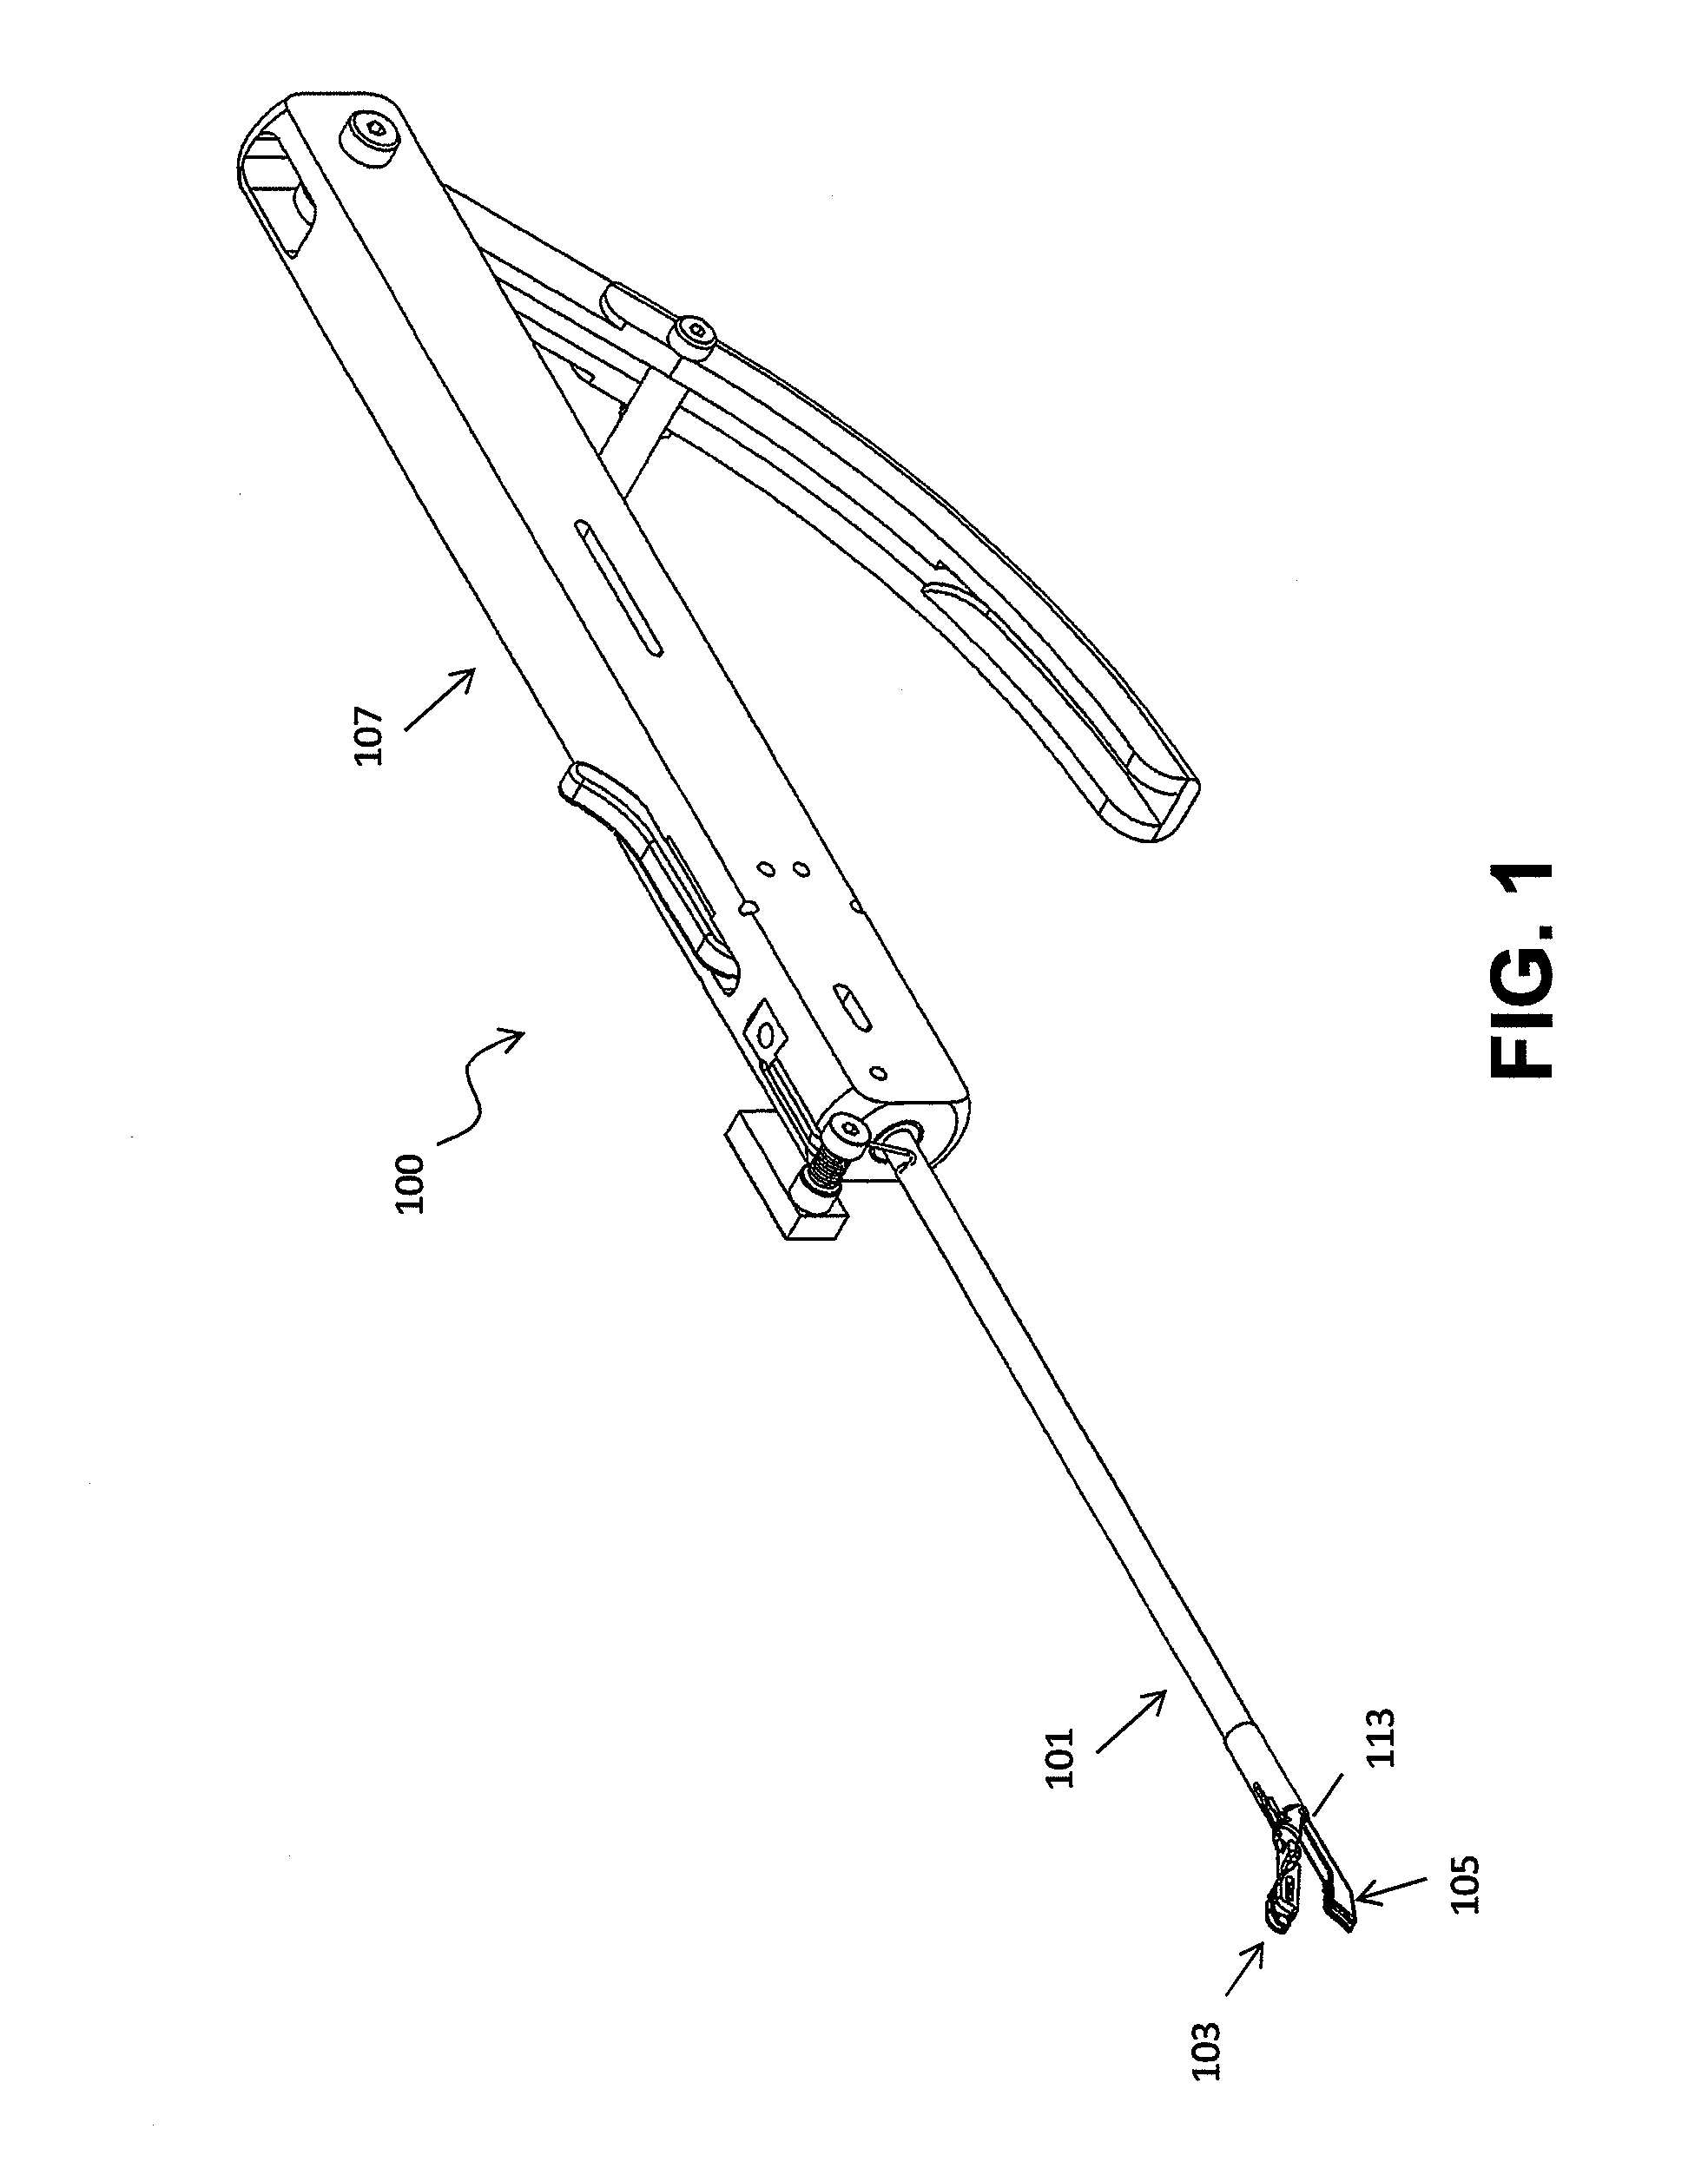 Suture passer devices and methods